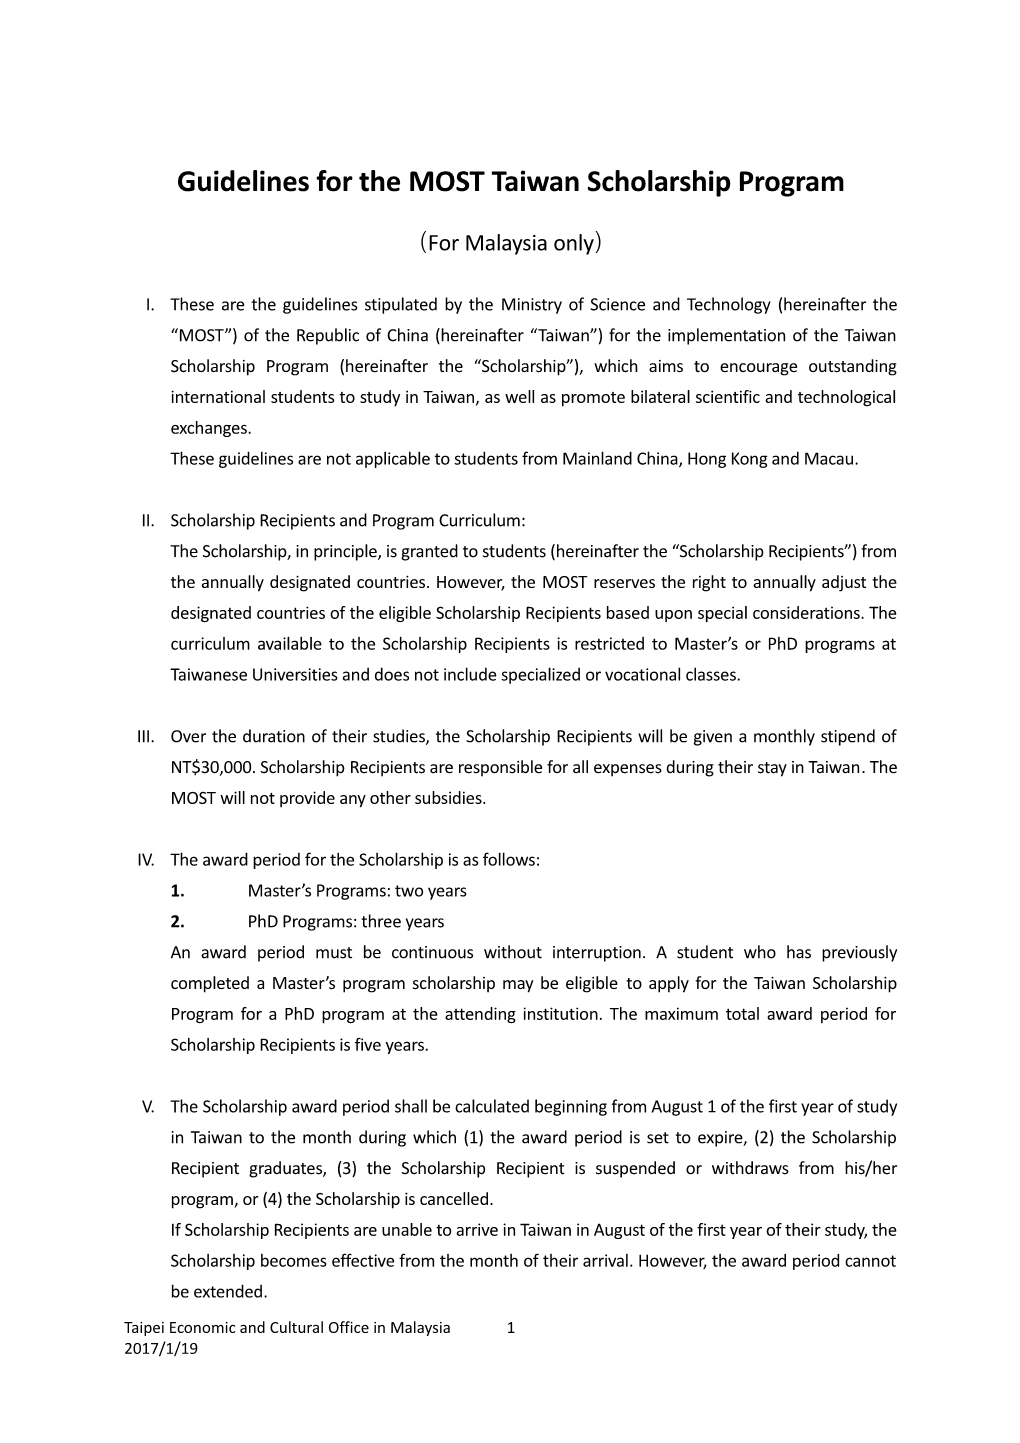 Guidelines for the Mosttaiwan Scholarship Program